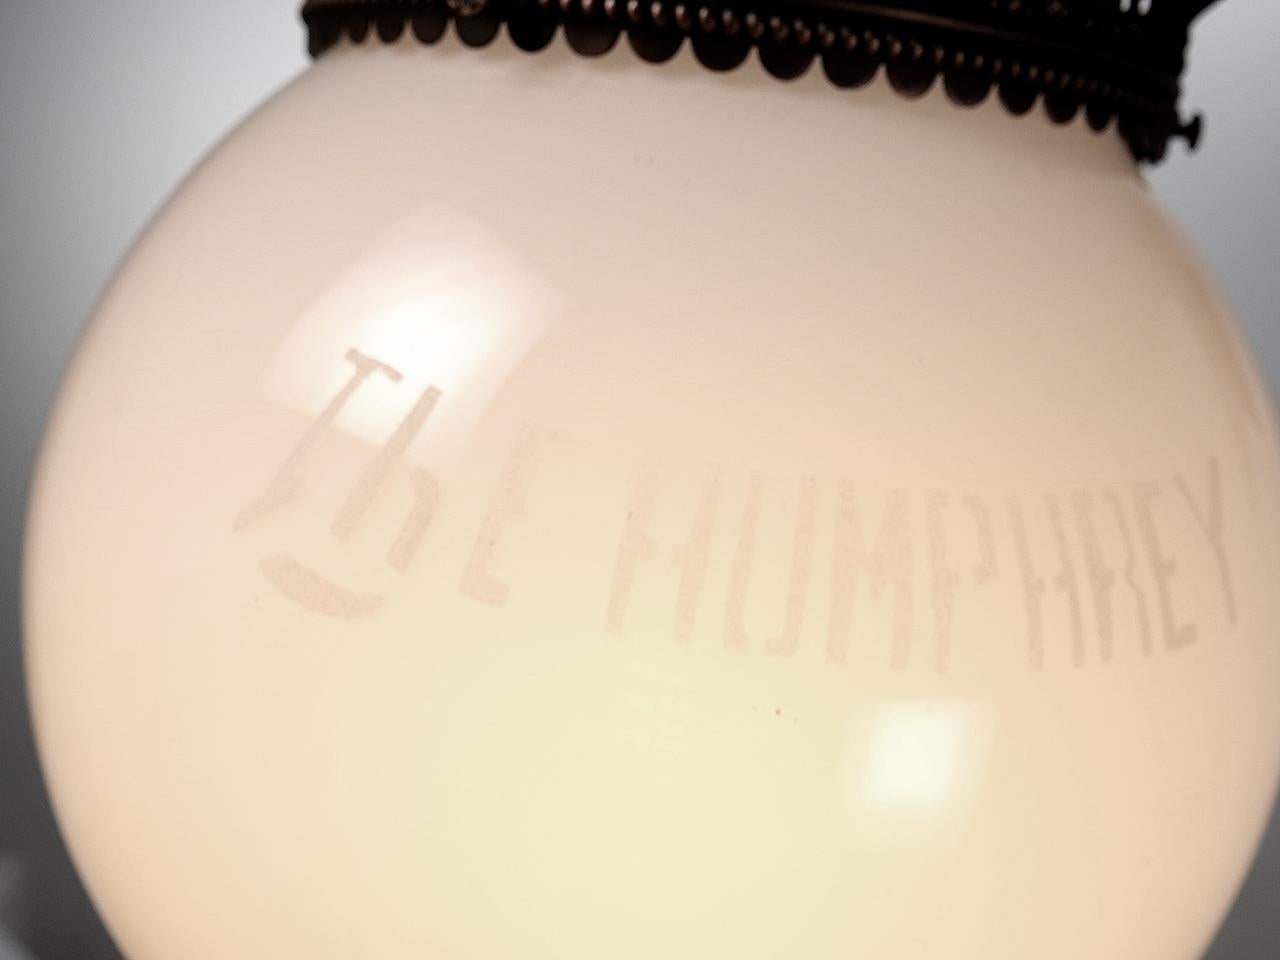 I can’t believe we have a matching pair of these amazing and ornate Humphrey lamps. Both milk glass globes are signed THE HUMPHREY. The lamps have been restored refinished and rewired. They are now each illuminated by an E12 candelabra bulb. Note